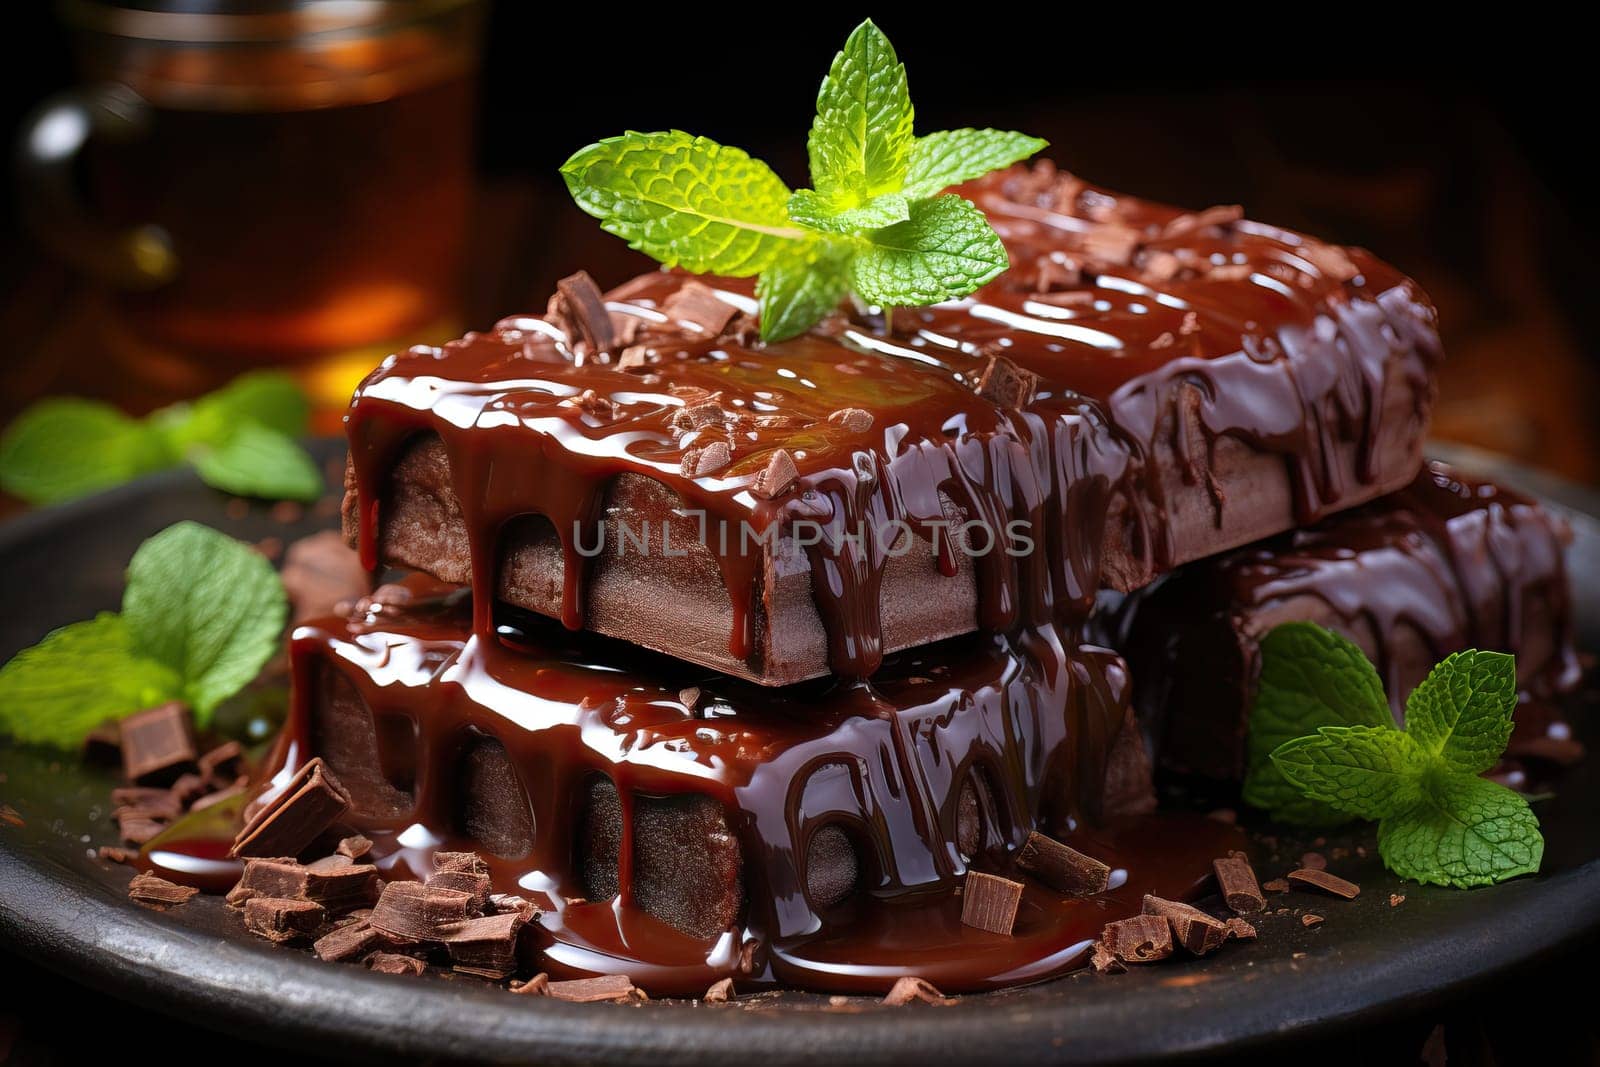 melted chocolate is poured on a piece of chocolate bars with a green mint leaf on the table on a black plate.